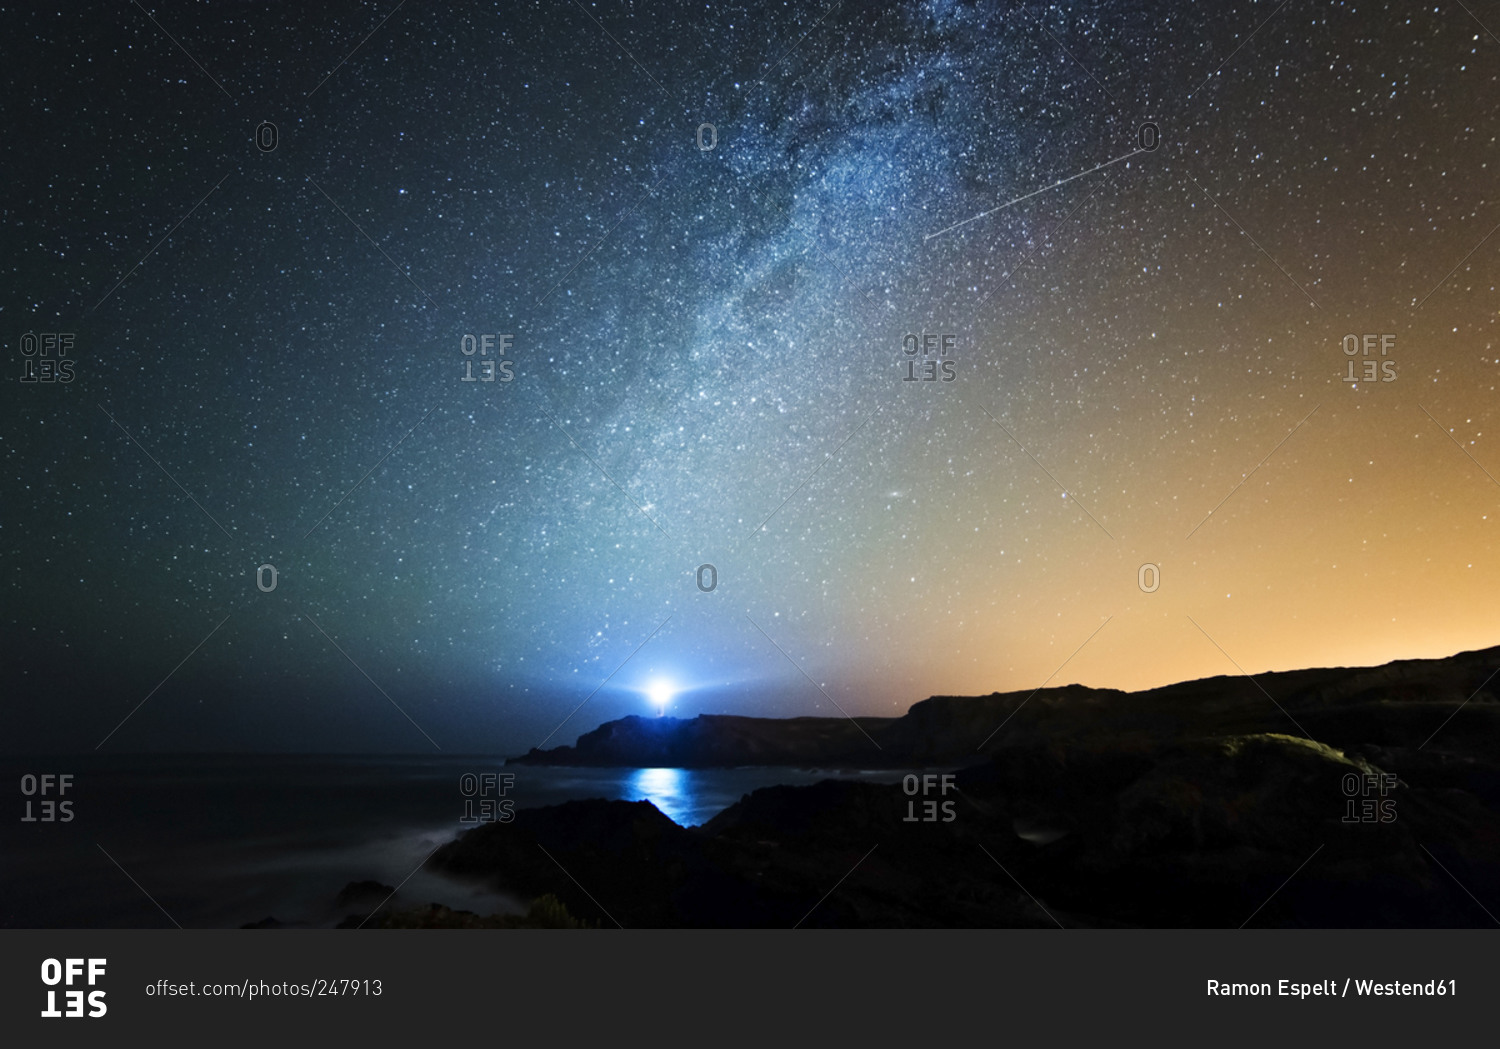 Starry sky with milky way and shooting star above the Galician coast